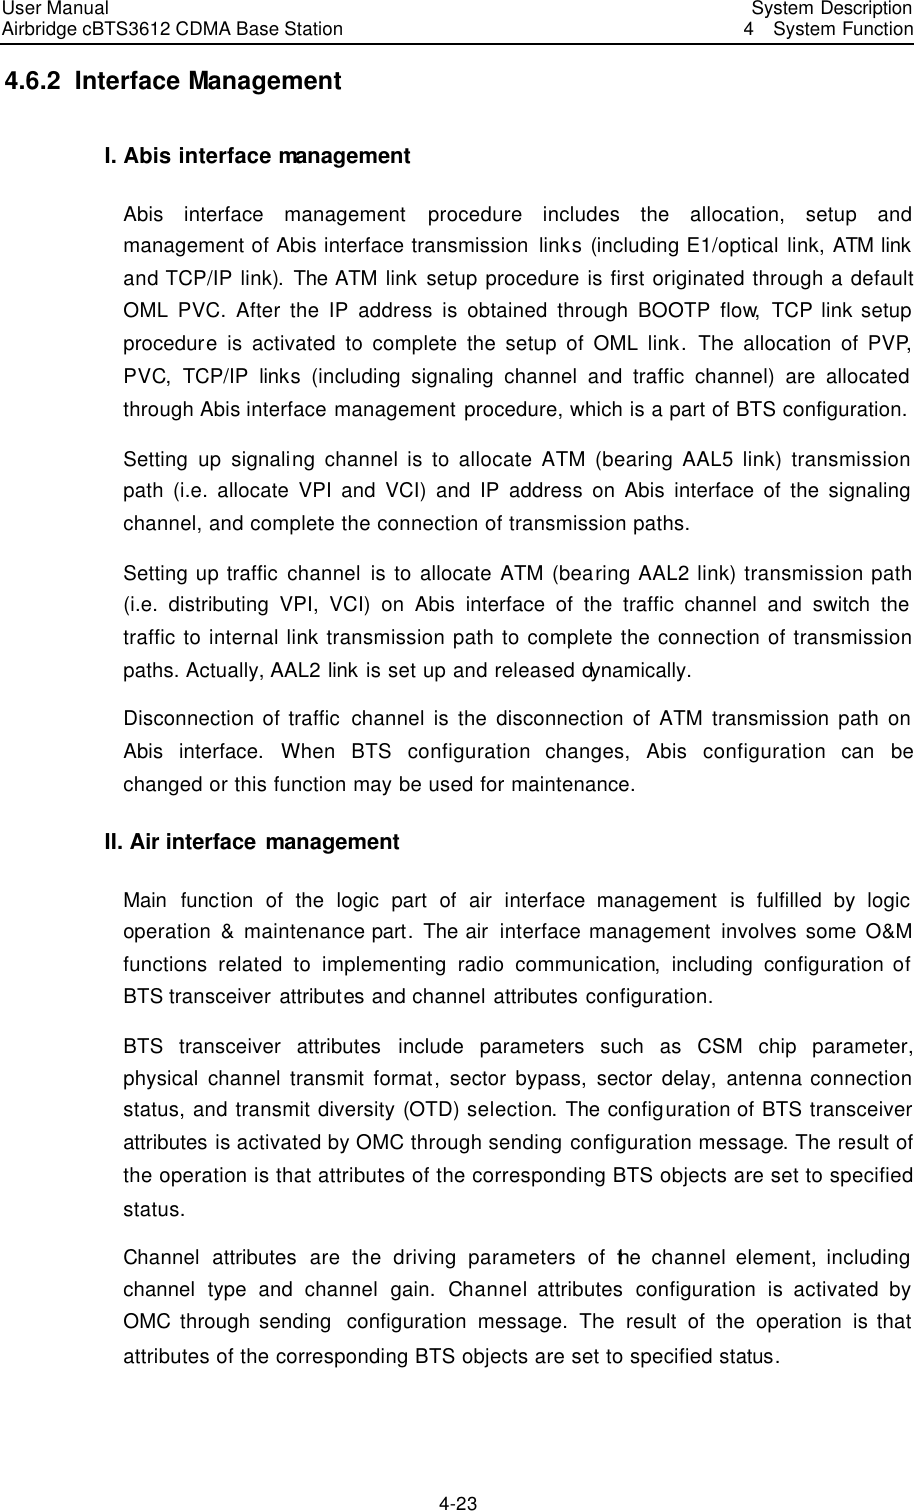 User Manual Airbridge cBTS3612 CDMA Base Station   System Description4  System Function 4-23 4.6.2  Interface Management I. Abis interface management Abis interface management procedure includes the allocation, setup and management of Abis interface transmission links (including E1/optical link, ATM link and TCP/IP link). The ATM link setup procedure is first originated through a default OML PVC. After the IP address is obtained through BOOTP flow,  TCP link setup procedure is activated to complete the setup of OML link.  The allocation of PVP, PVC,  TCP/IP  links (including signaling channel and traffic channel) are allocated through Abis interface management procedure, which is a part of BTS configuration. Setting up signaling channel is to allocate ATM (bearing AAL5 link) transmission path (i.e. allocate VPI and VCI) and IP address on Abis interface of the signaling channel, and complete the connection of transmission paths. Setting up traffic channel is to allocate ATM (bearing AAL2 link) transmission path (i.e. distributing VPI, VCI) on Abis interface of the traffic channel and switch the traffic to internal link transmission path to complete the connection of transmission paths. Actually, AAL2 link is set up and released dynamically. Disconnection of traffic channel is the disconnection of ATM transmission path on Abis interface. When BTS configuration changes, Abis configuration can be changed or this function may be used for maintenance. II. Air interface management Main function of the logic part of air interface management is fulfilled by logic operation &amp; maintenance part. The air  interface management involves some O&amp;M functions related to implementing radio communication,  including  configuration of BTS transceiver attributes and channel attributes configuration.   BTS transceiver attributes include parameters such as CSM chip parameter, physical channel transmit format, sector bypass, sector delay, antenna connection status, and transmit diversity (OTD) selection. The  configuration of BTS transceiver attributes is activated by OMC through sending configuration message. The result of the operation is that attributes of the corresponding BTS objects are set to specified status. Channel attributes are the driving parameters of the  channel element, including channel type and channel gain.  Channel attributes configuration is activated by OMC through sending  configuration message. The result of the operation is that attributes of the corresponding BTS objects are set to specified status.   